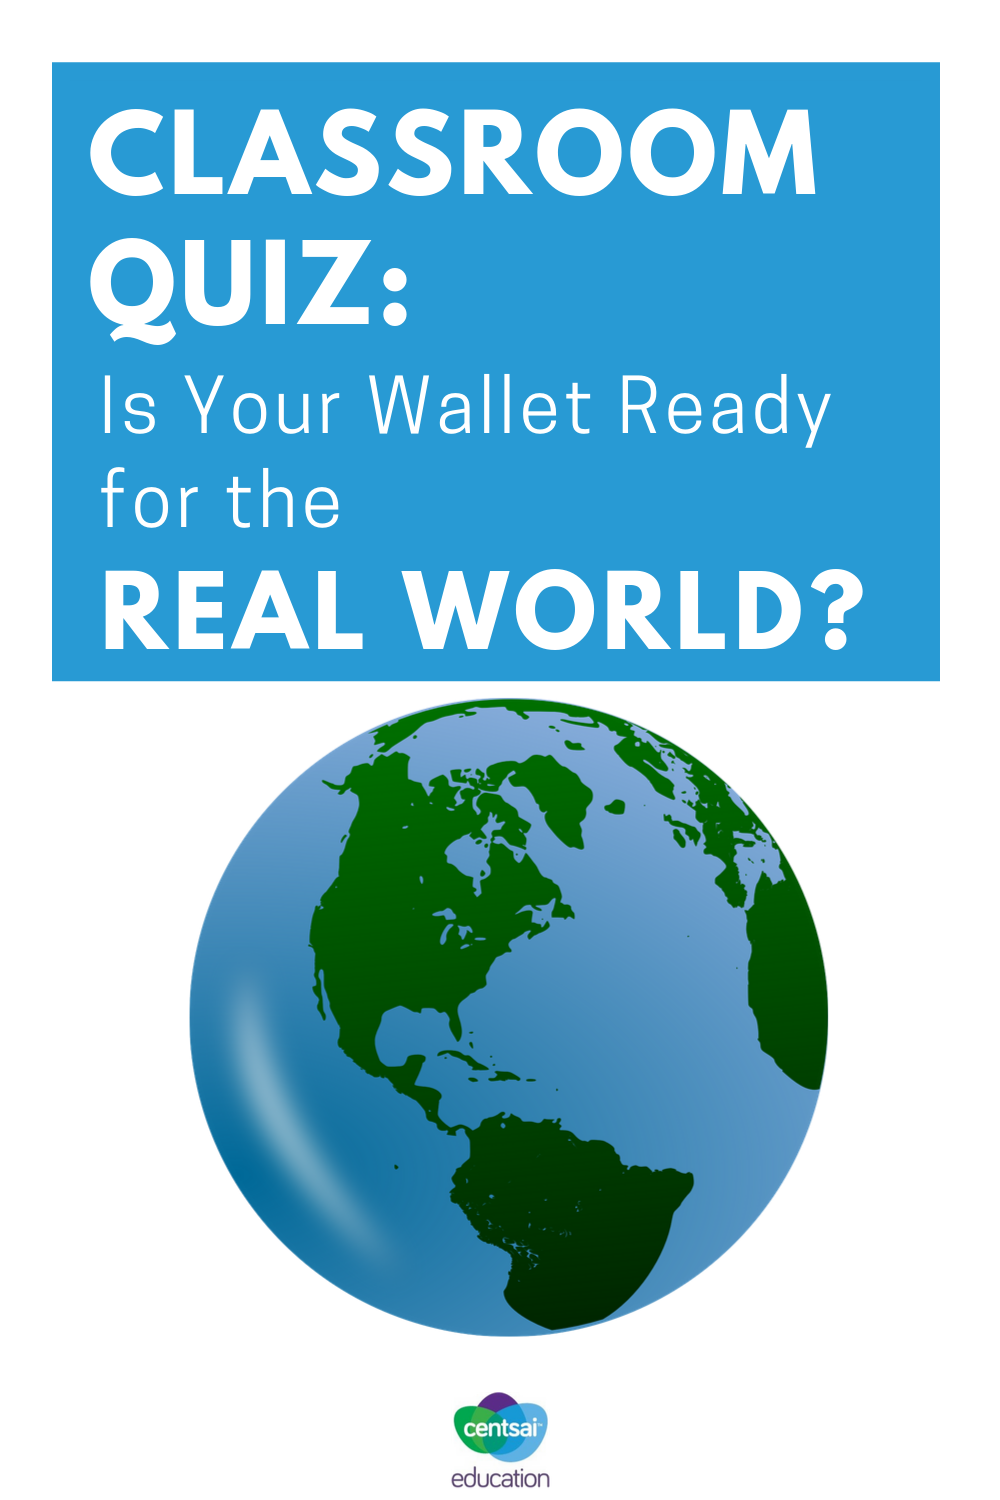 Students in your class probably have wallets — but are they ready for the real world? Find out here. #financialaid #quiz #college #collegestudents